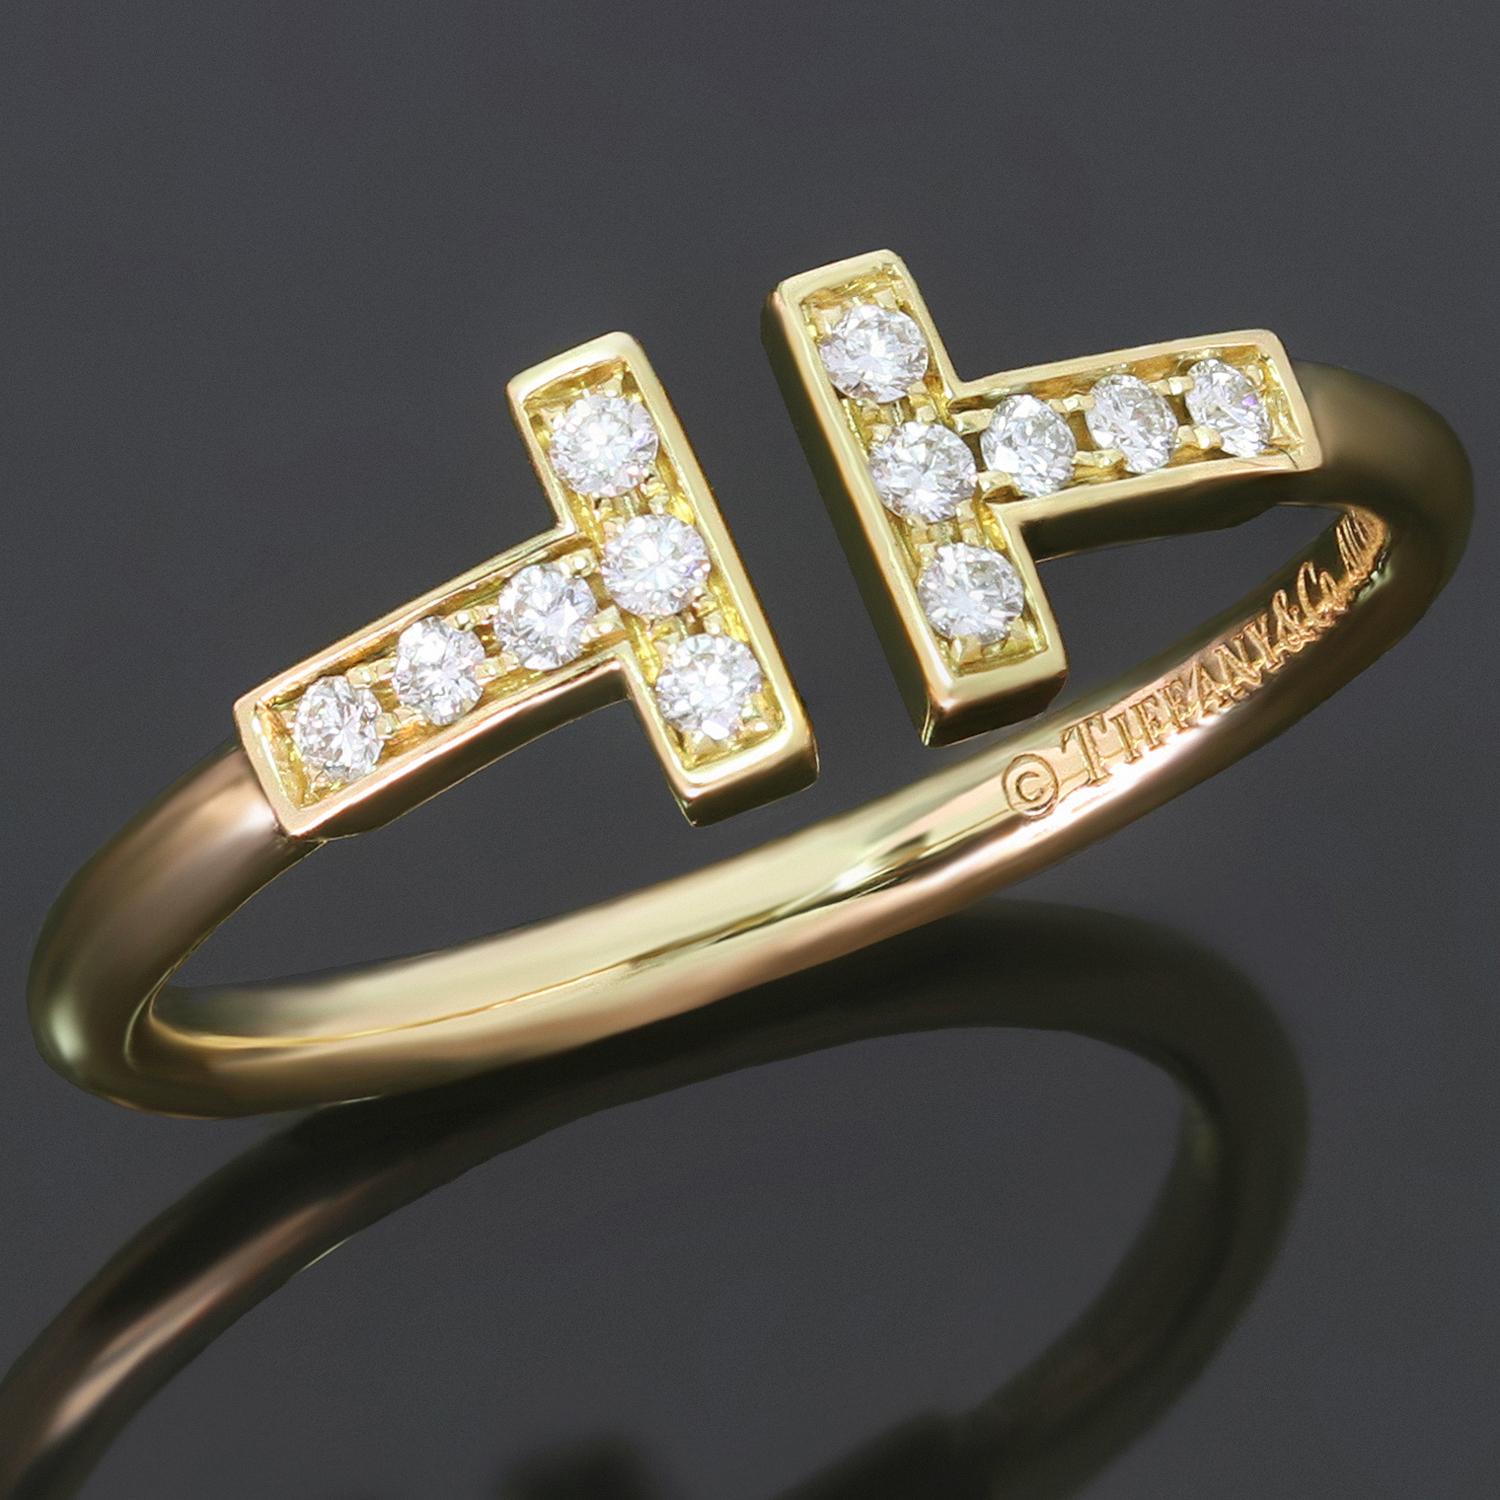 This gorgeous modern Tiffany ring is crafted in 18k yellow gold and set with brilliant-cut round diamonds. The Tiffany T Wire collection features graphic angles, clean lines, and dazzling diamonds accentuating the ring's bold and timeless form. Made